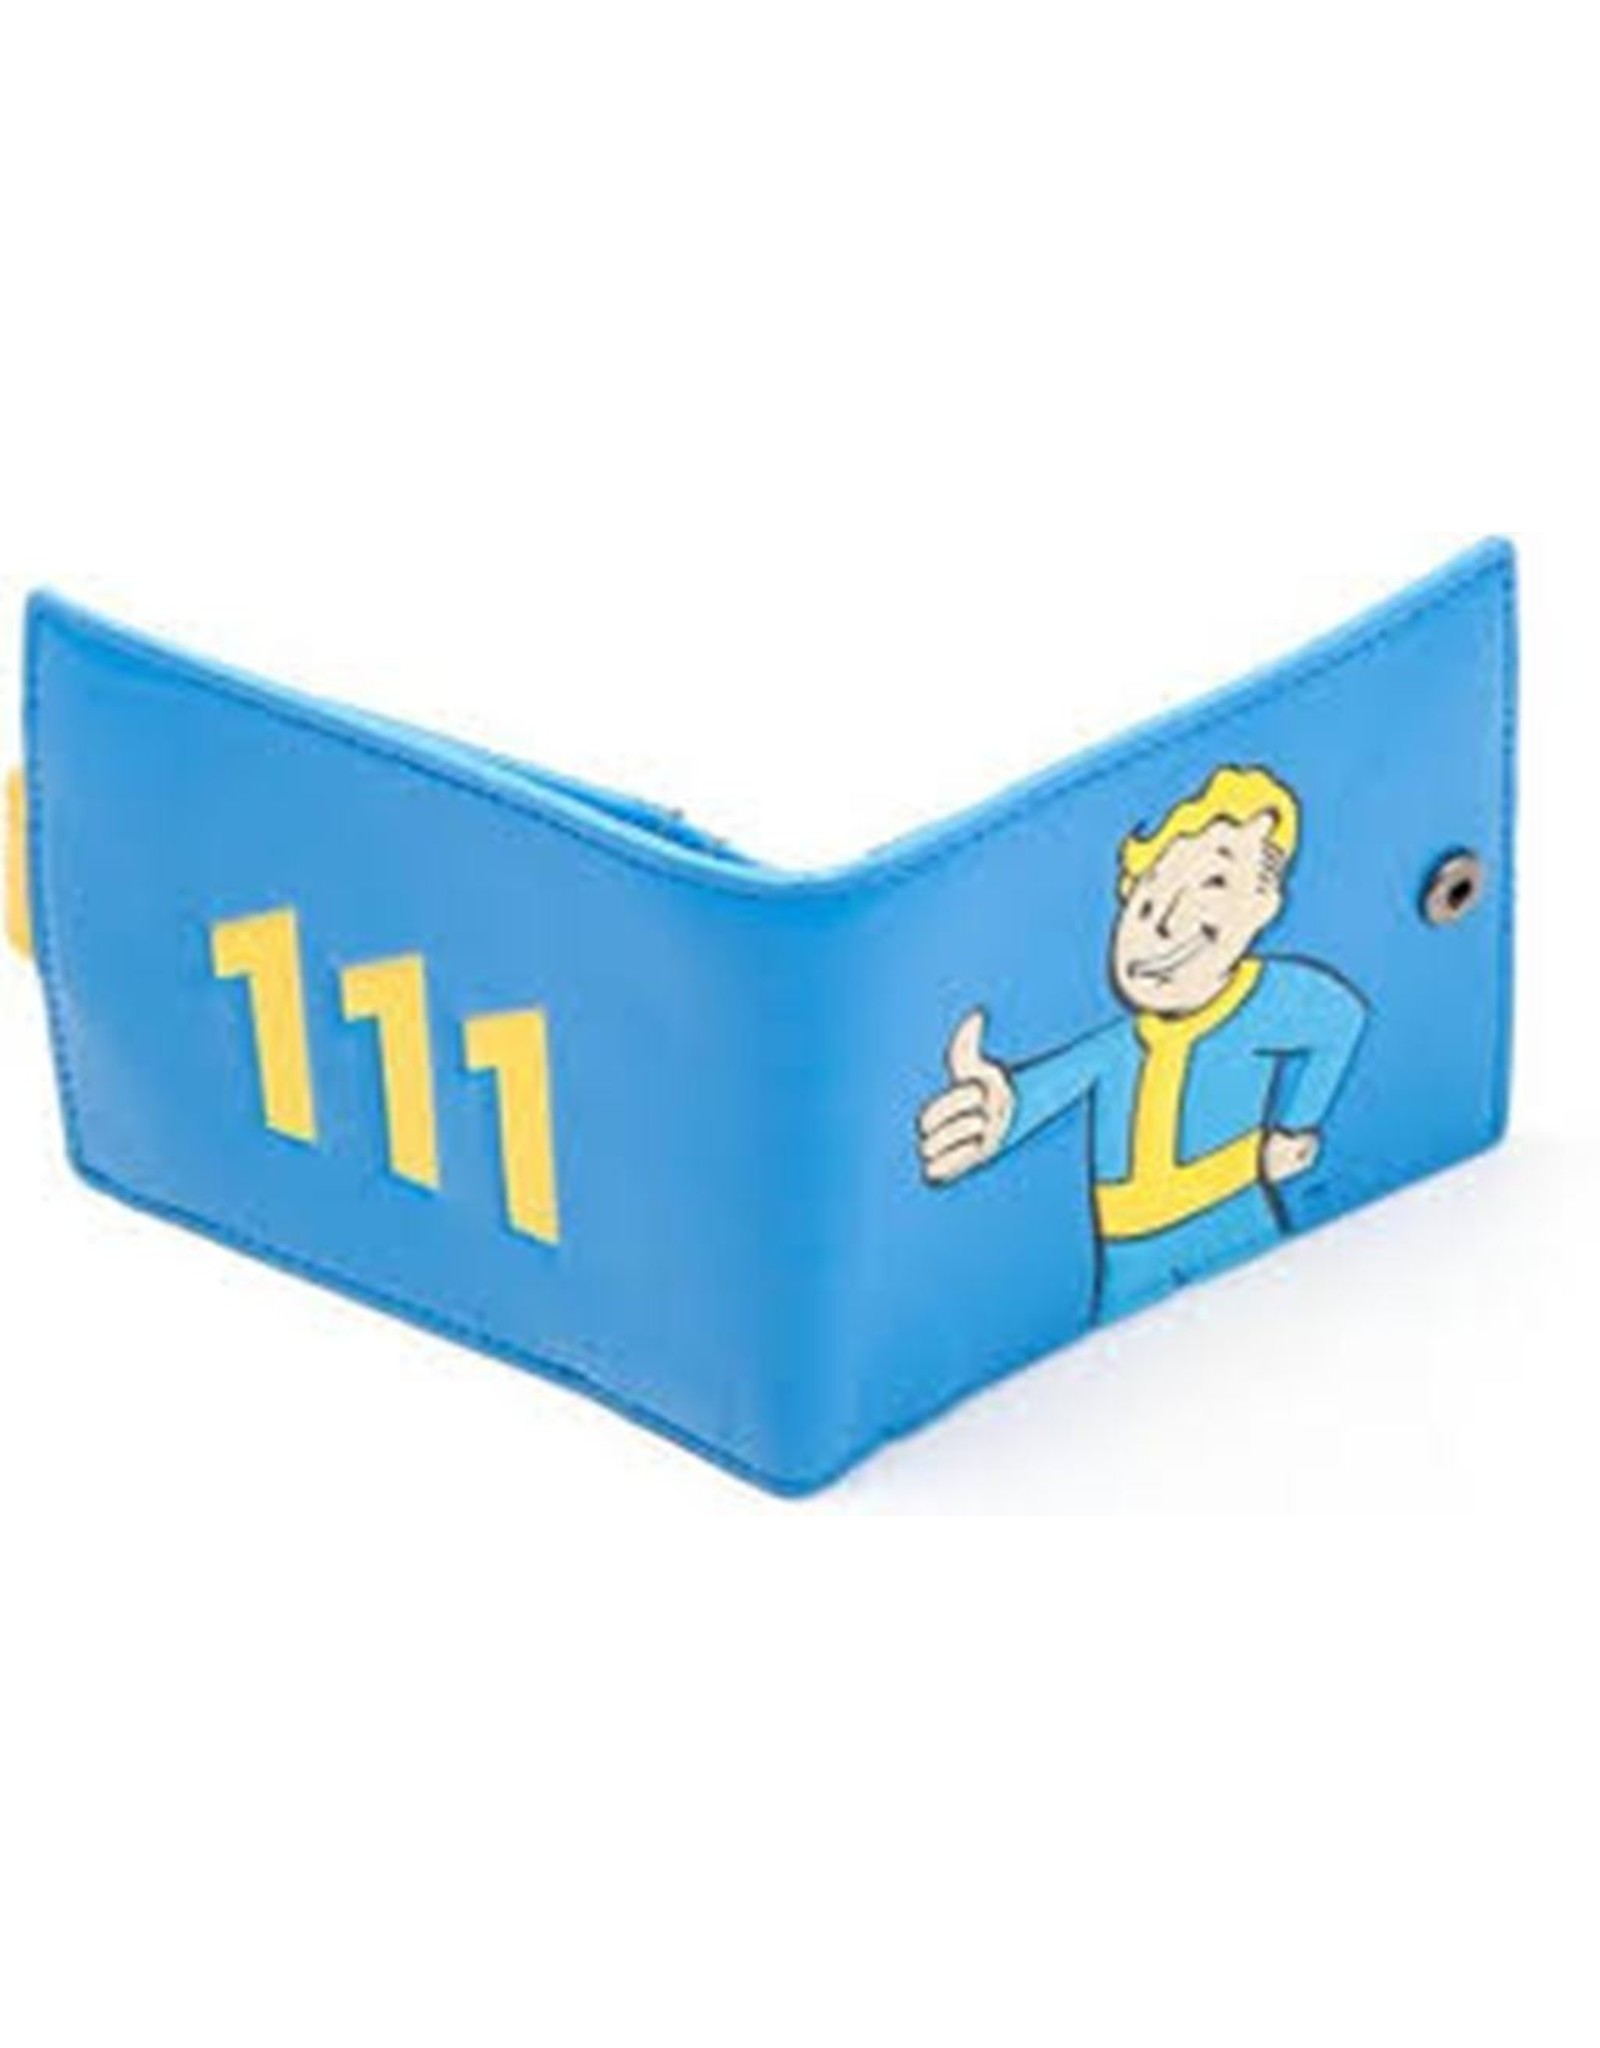 Fall Out Merchandise wallets - Vault Boy approves wallet